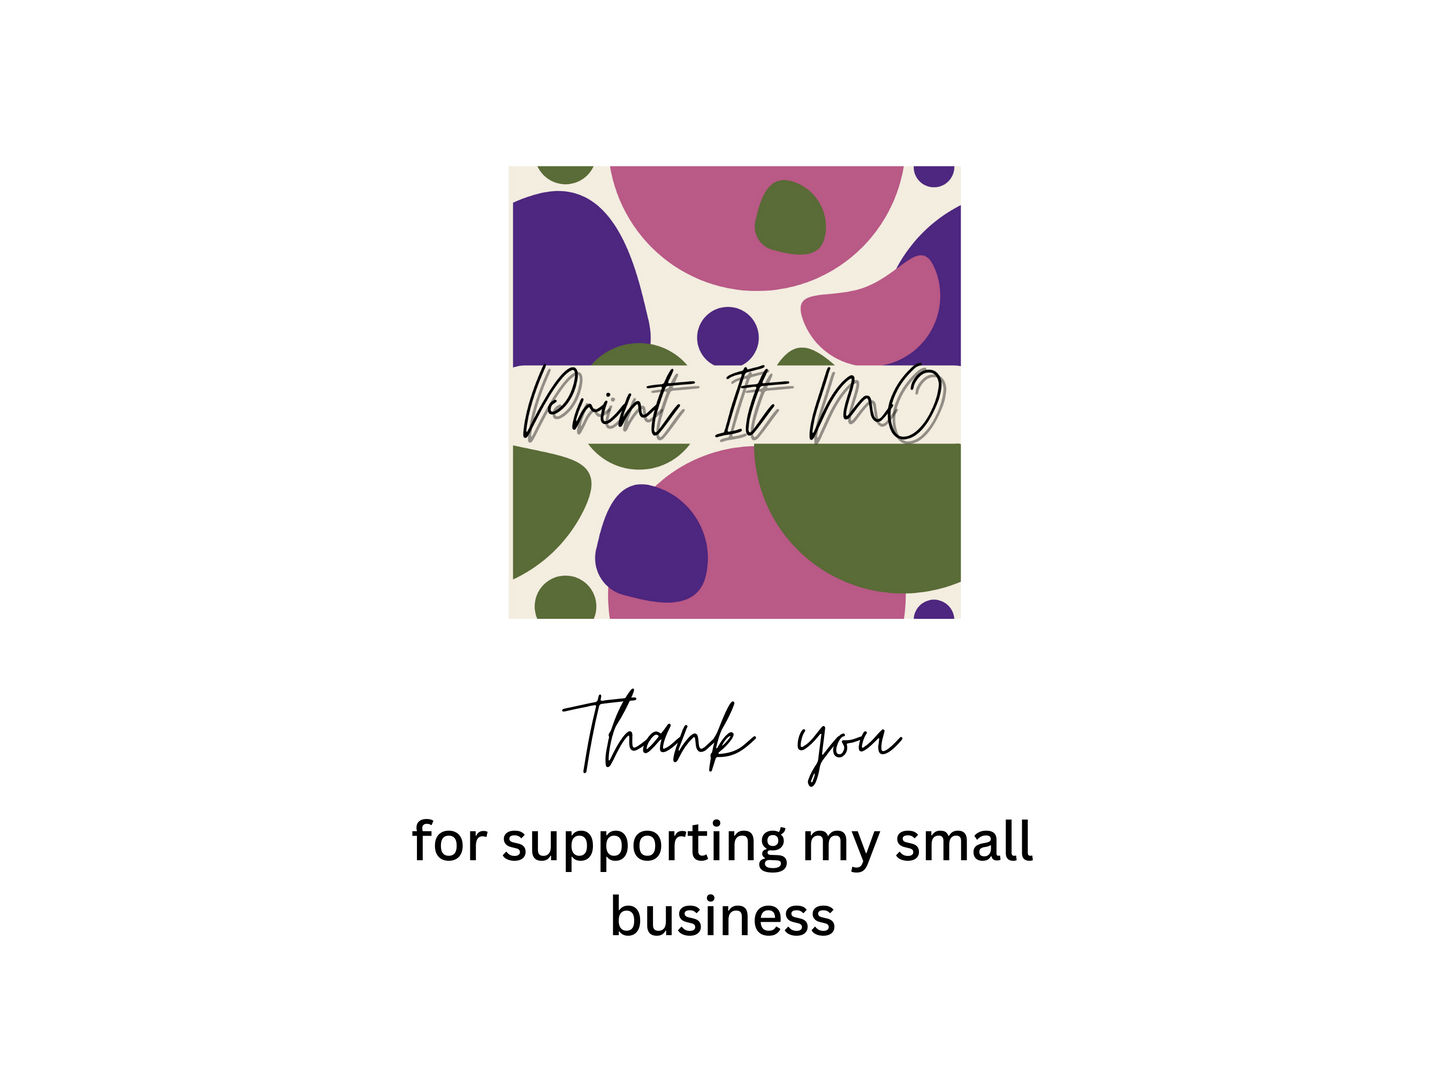 Print It Mo logo and thank you statement